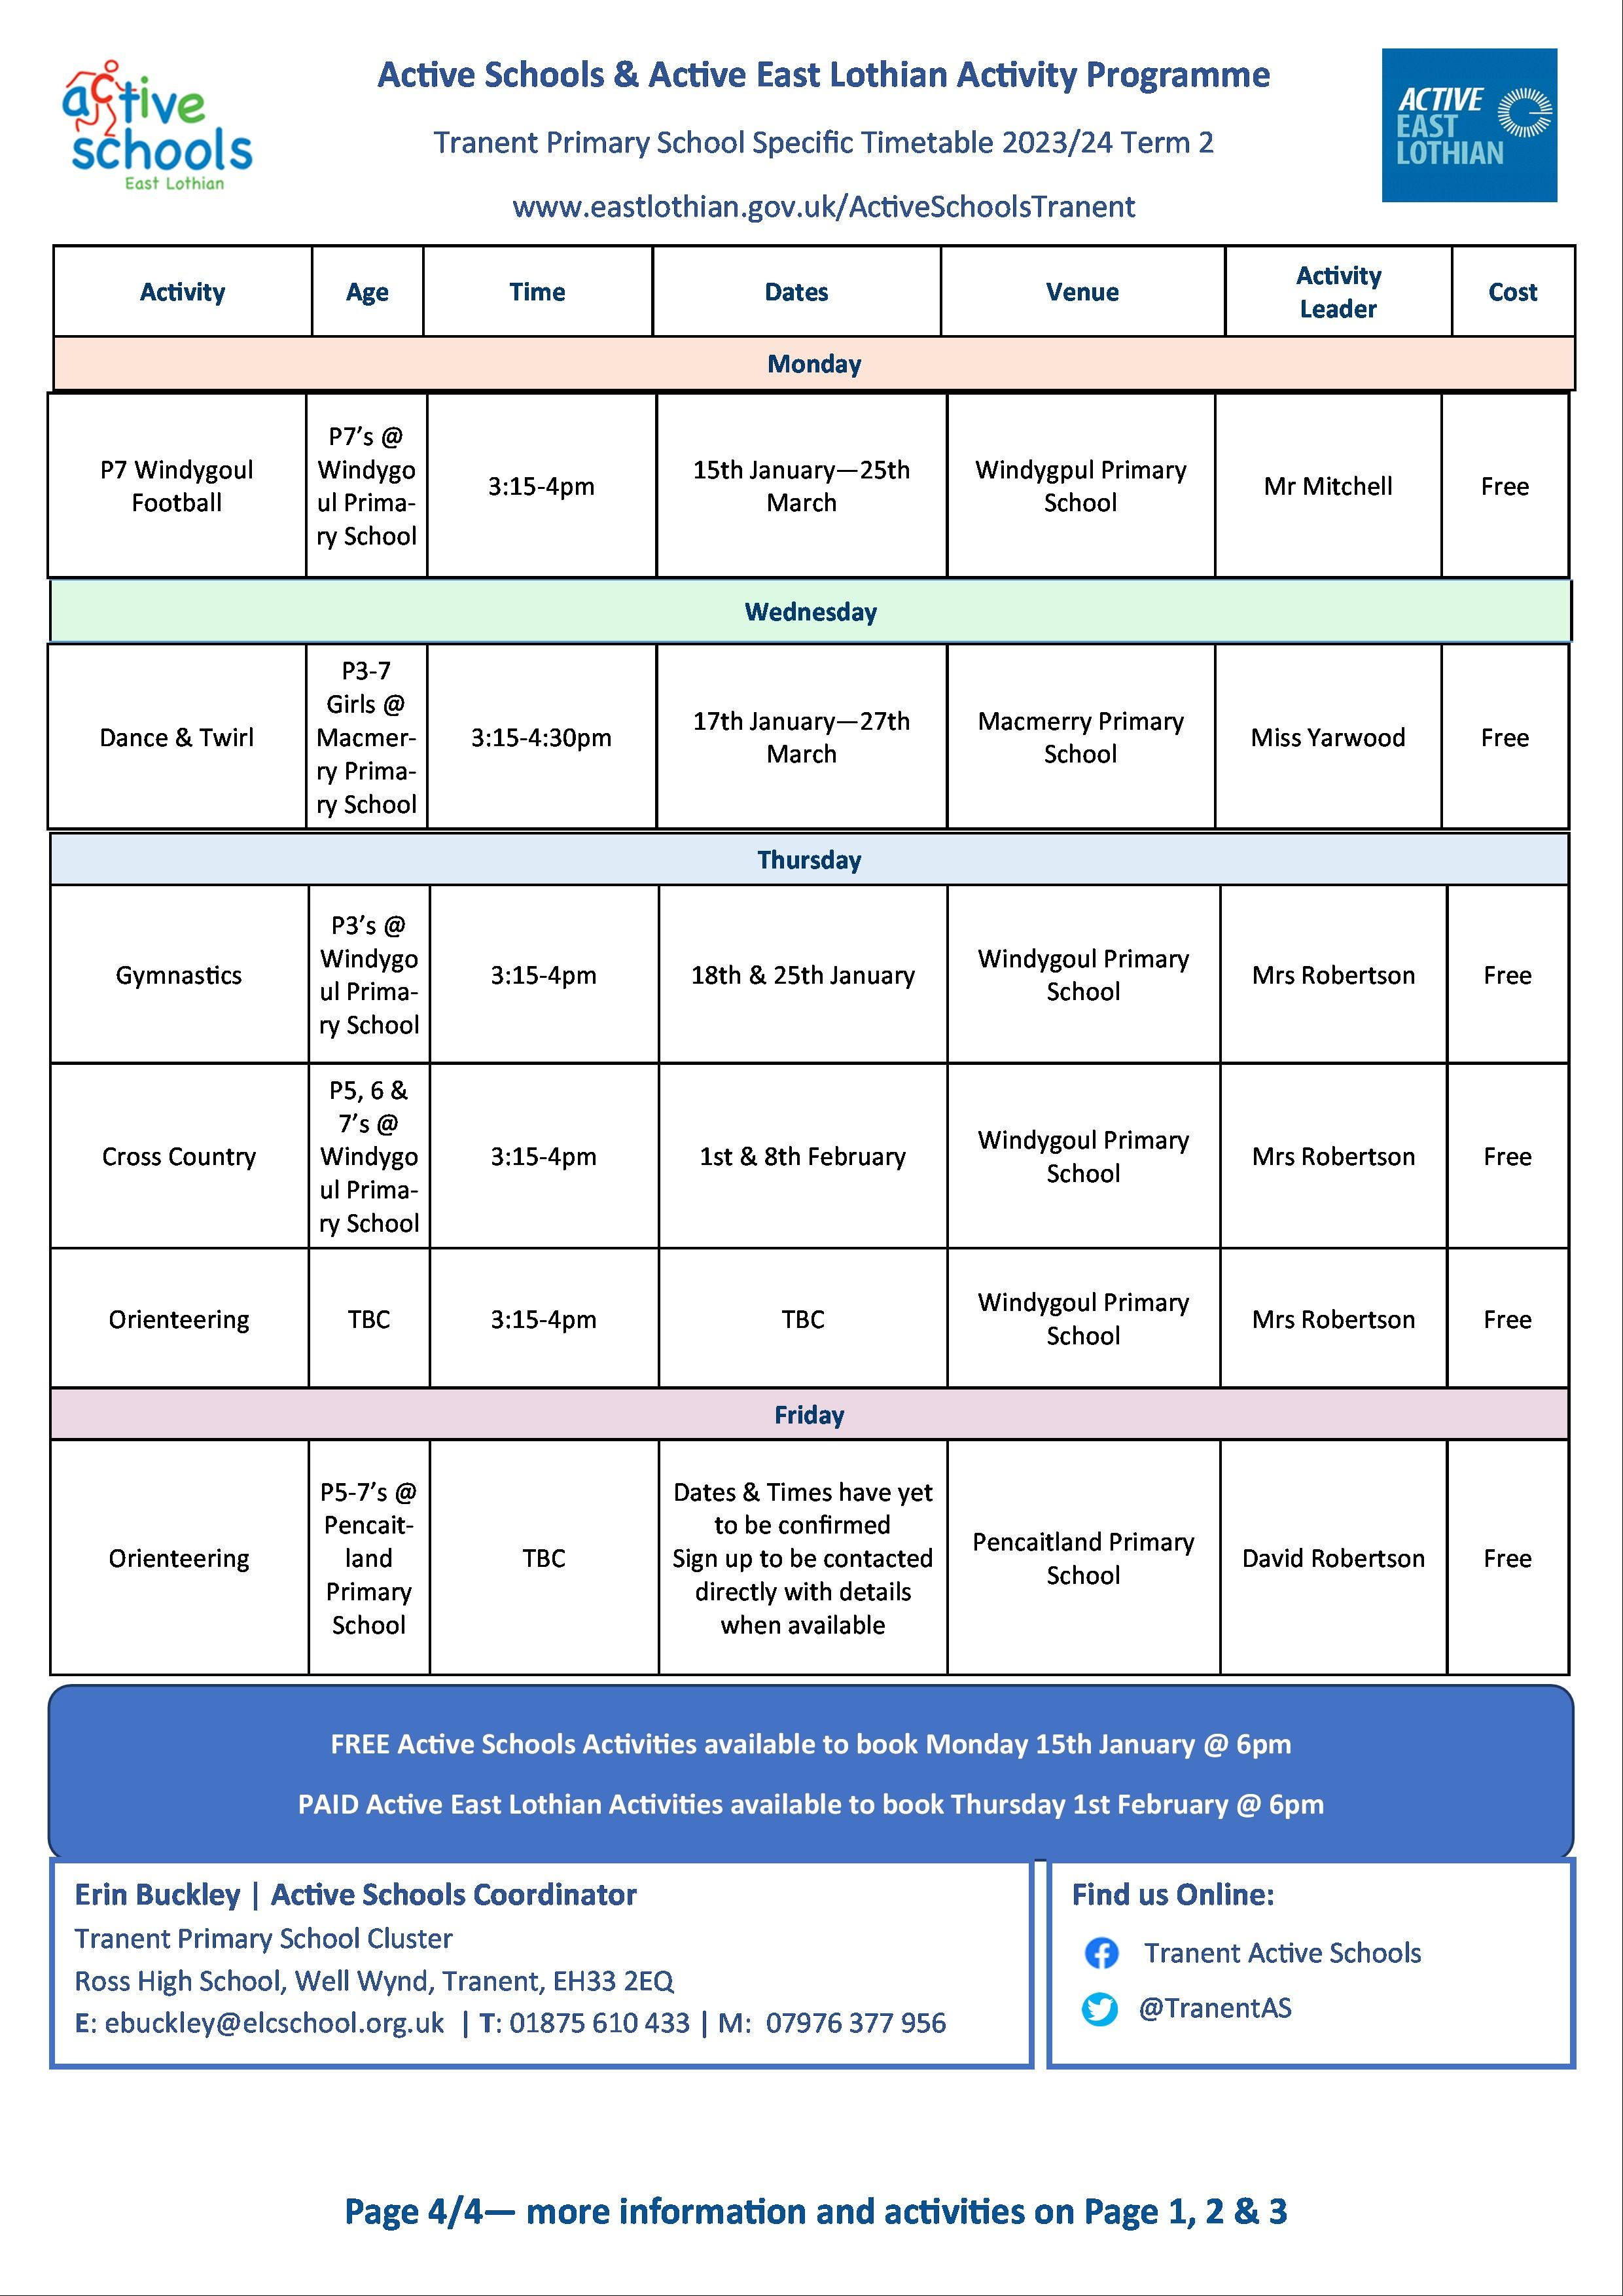 Tranent Active Schools Primary Cluster - Term 2 Timetable Page 4/4